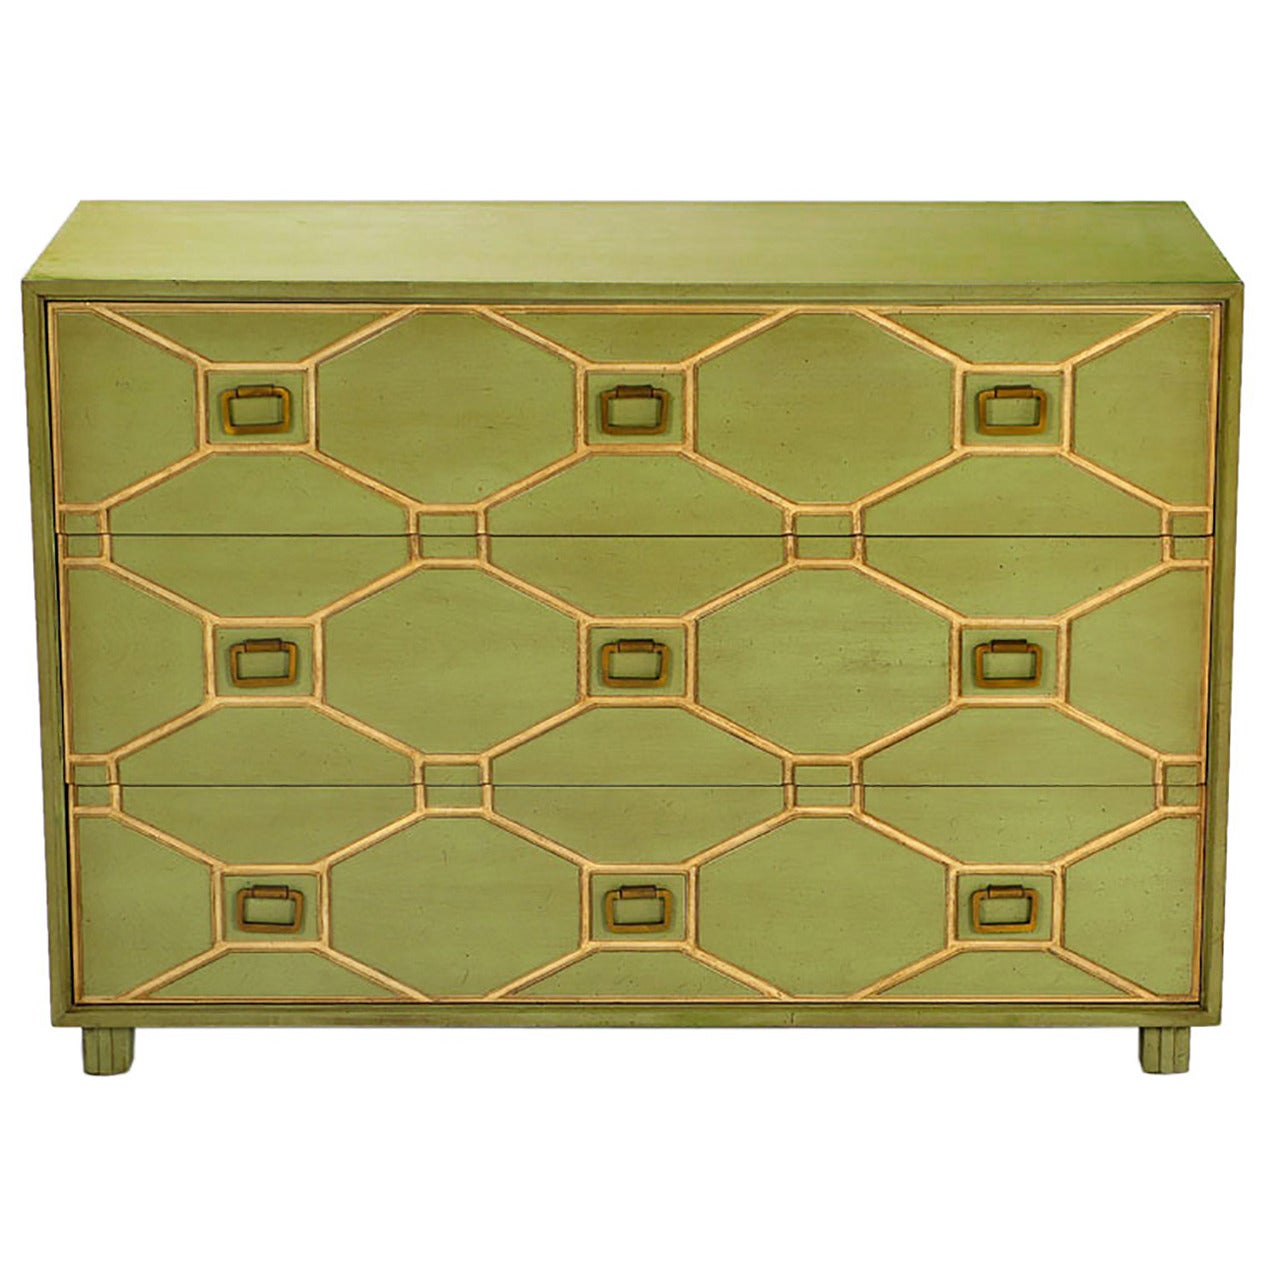 Dorothy Draper Viennese Commode with Original Lacquer Finish